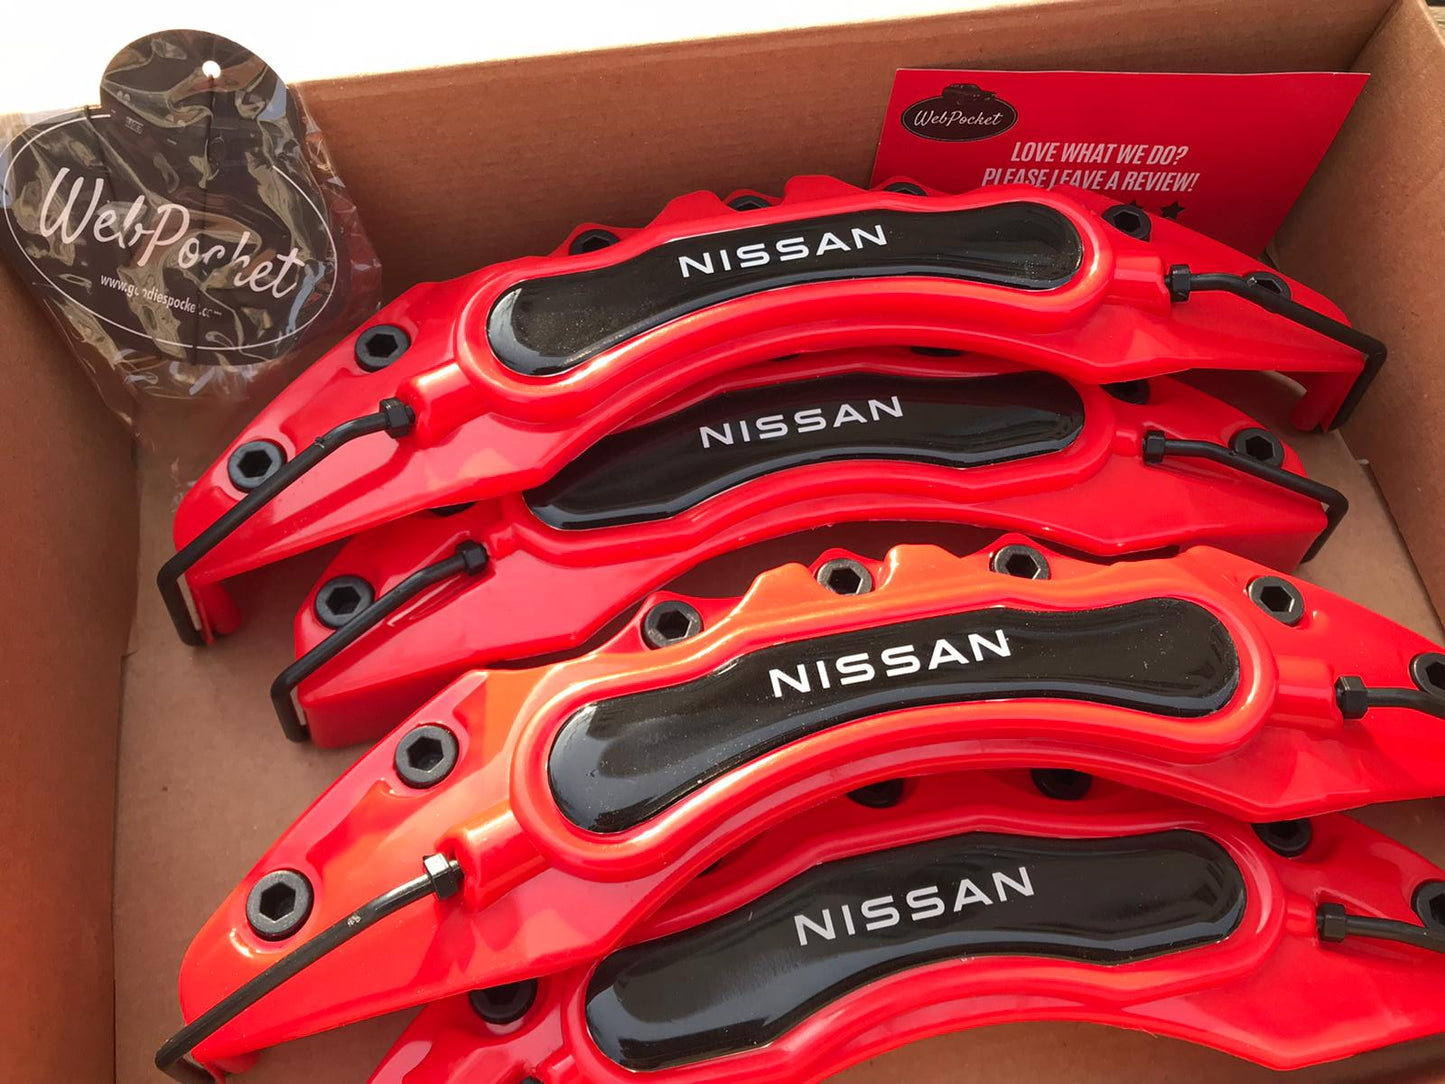 4Pc for Nissan Red Big Brake Caliper Covers / Nissan Accesories